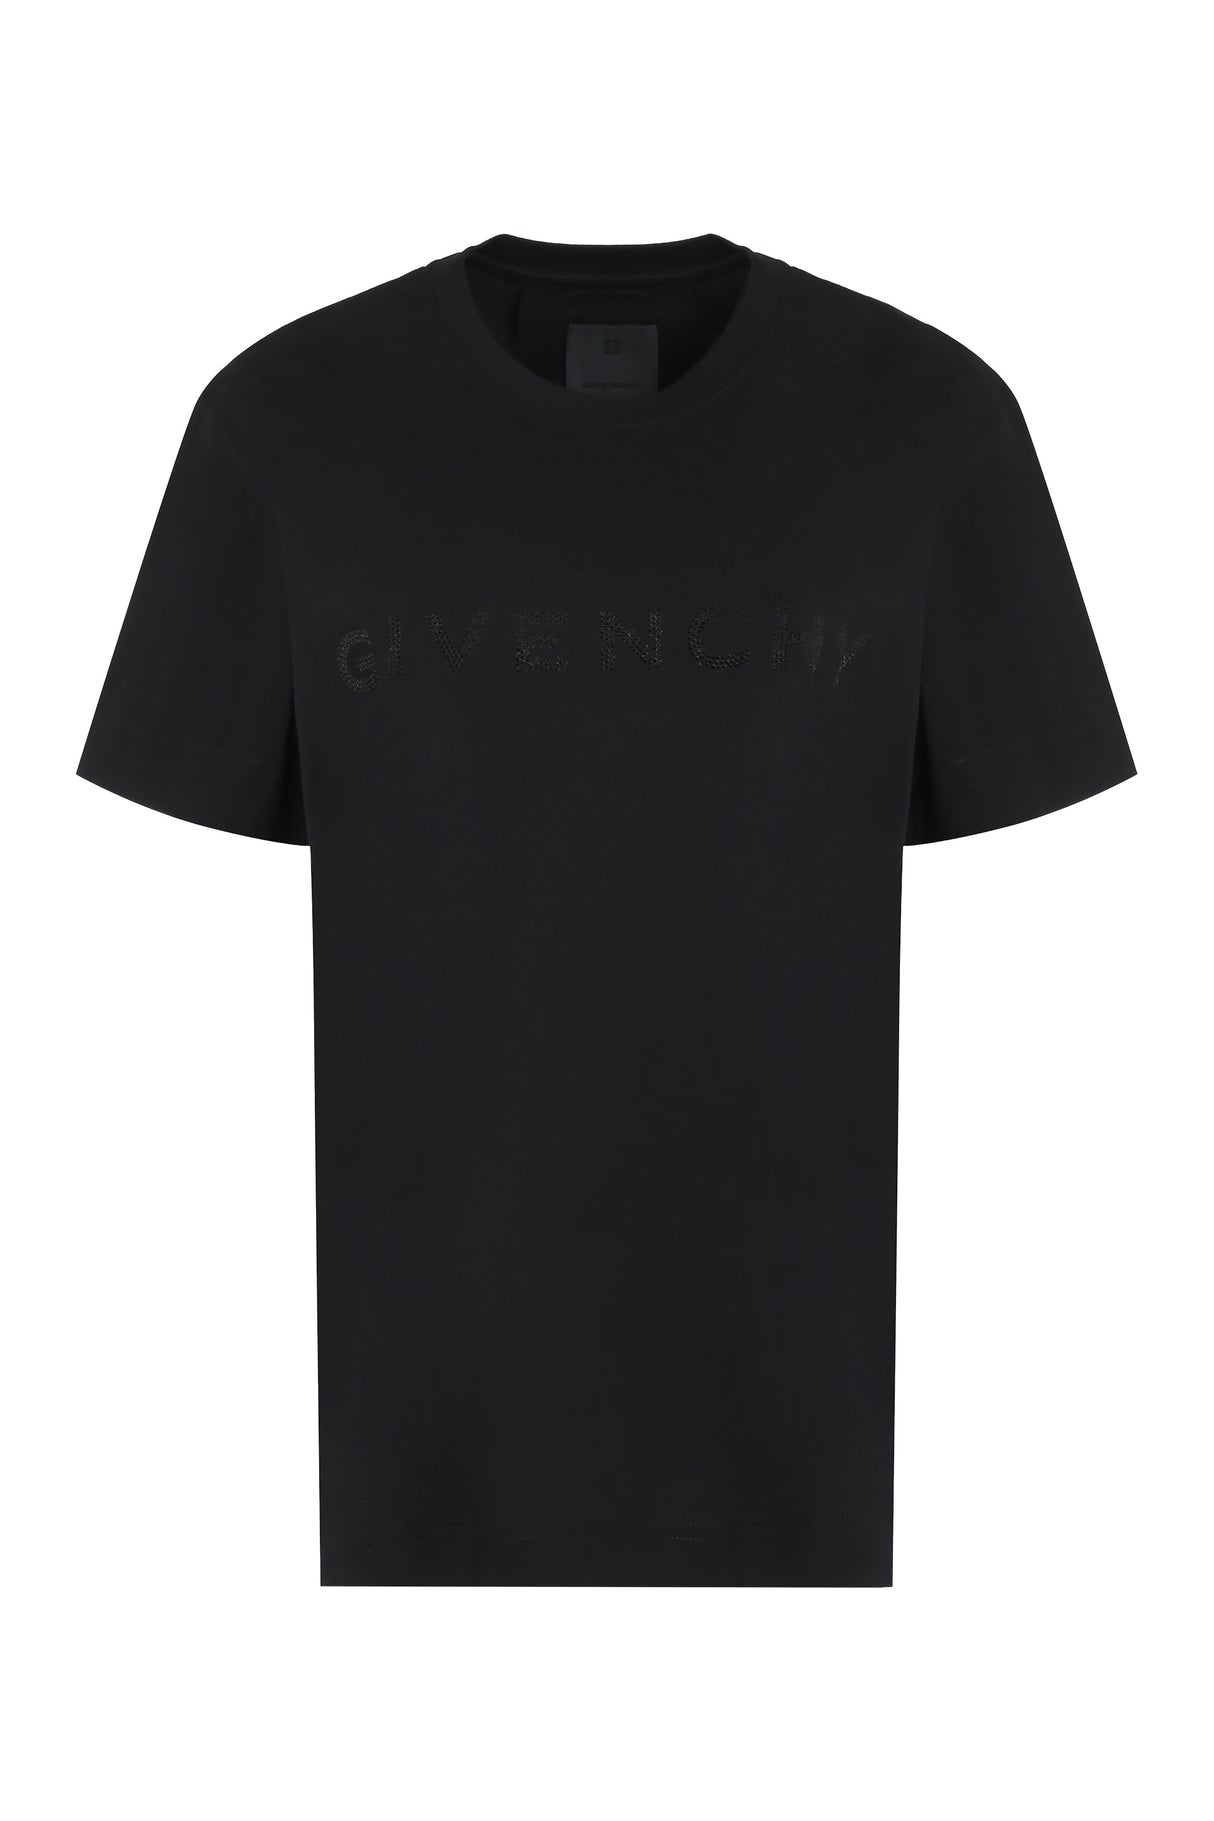 GIVENCHY Rhinestones Logo Cotton T-Shirt for Women - FW23 Collection